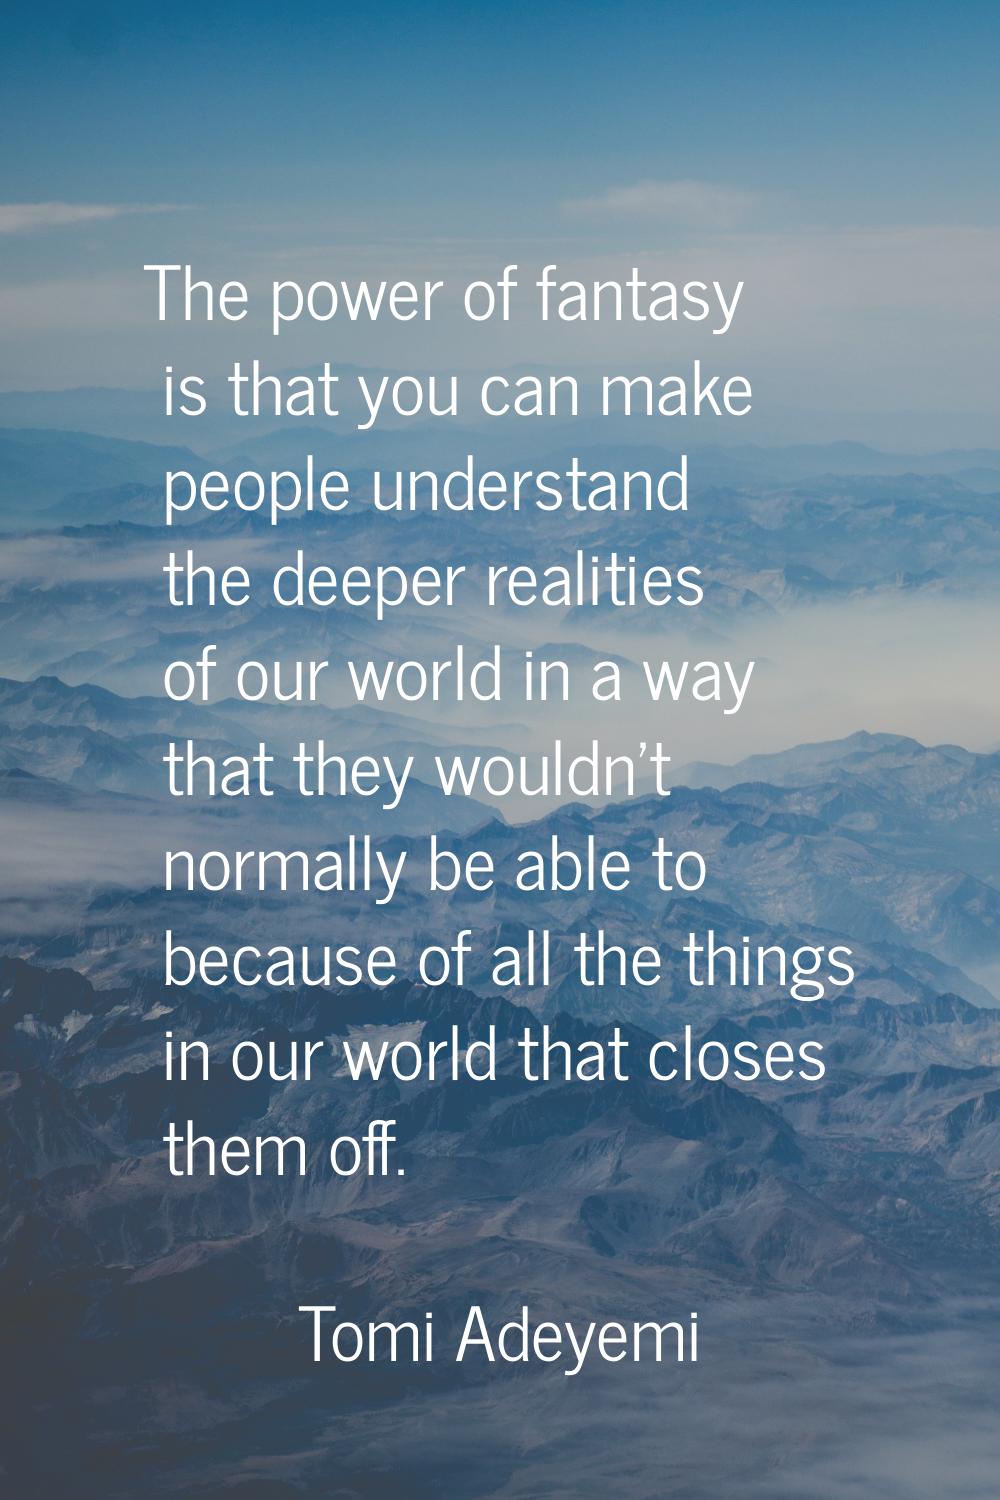 The power of fantasy is that you can make people understand the deeper realities of our world in a 